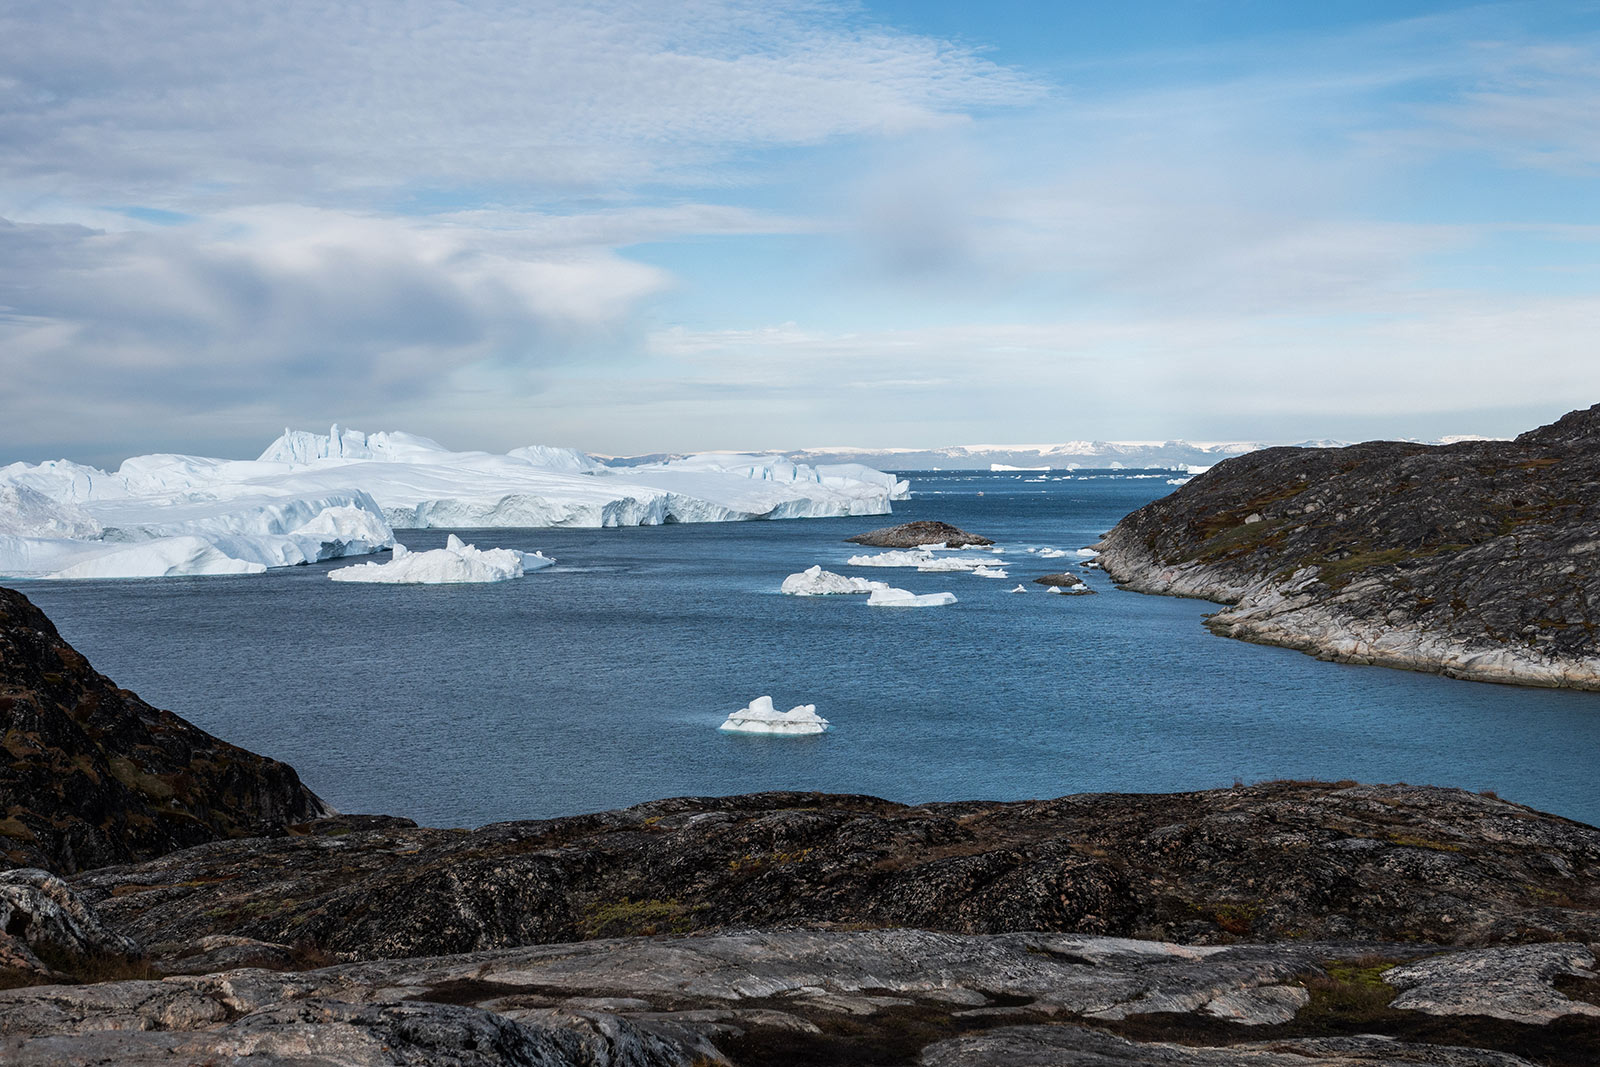 A vista of Greenland, home of the Aappaluttoq mine